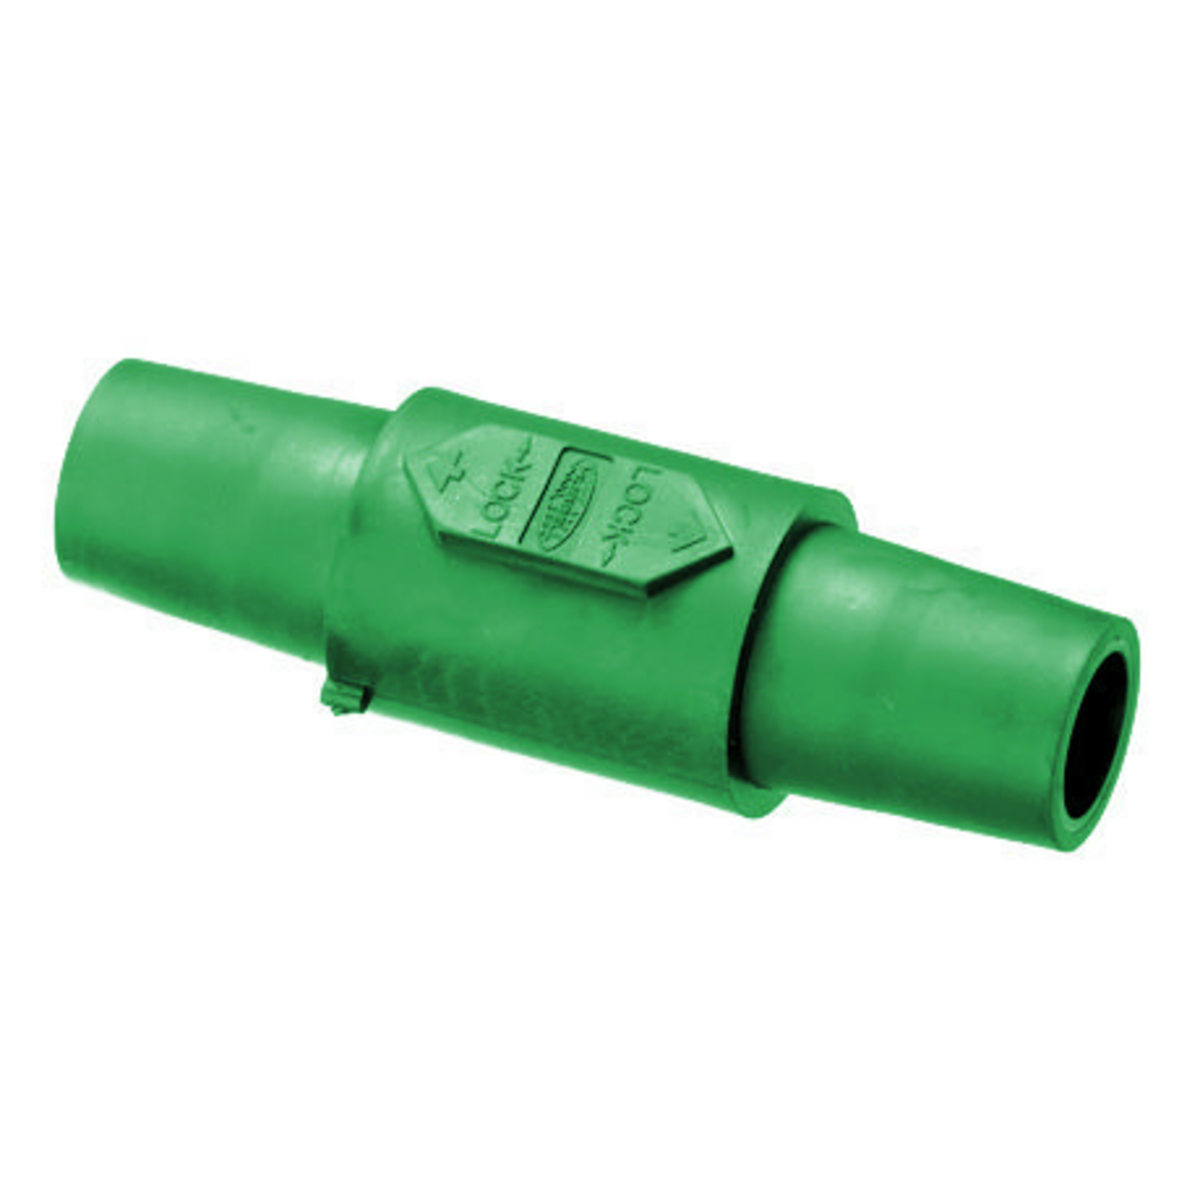 Hubbell Hbldmgn SinglePole Double Male Connector Green for sale online 